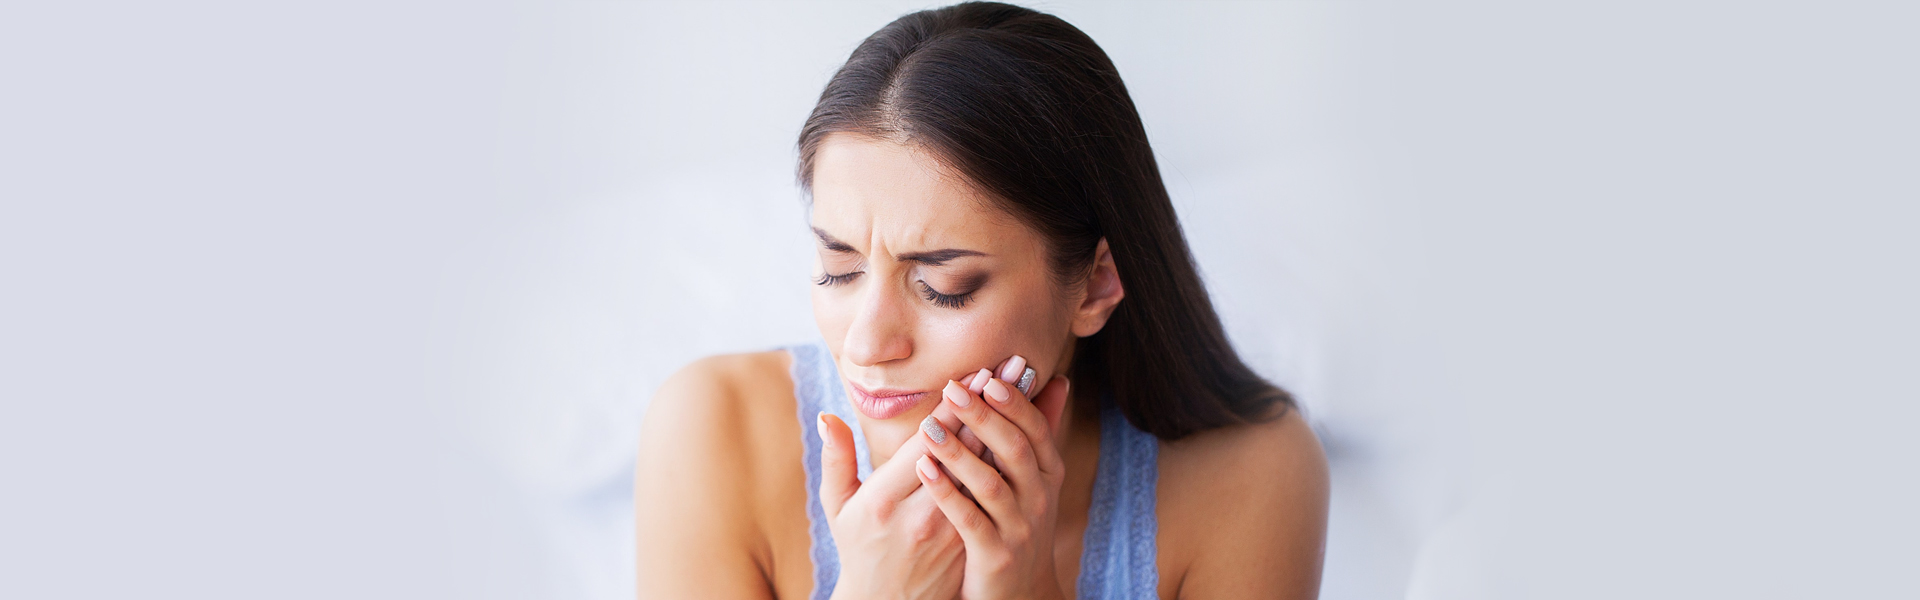 Scared of Dental Emergencies? Learn How to Handle It with Guidance from Our Professionals